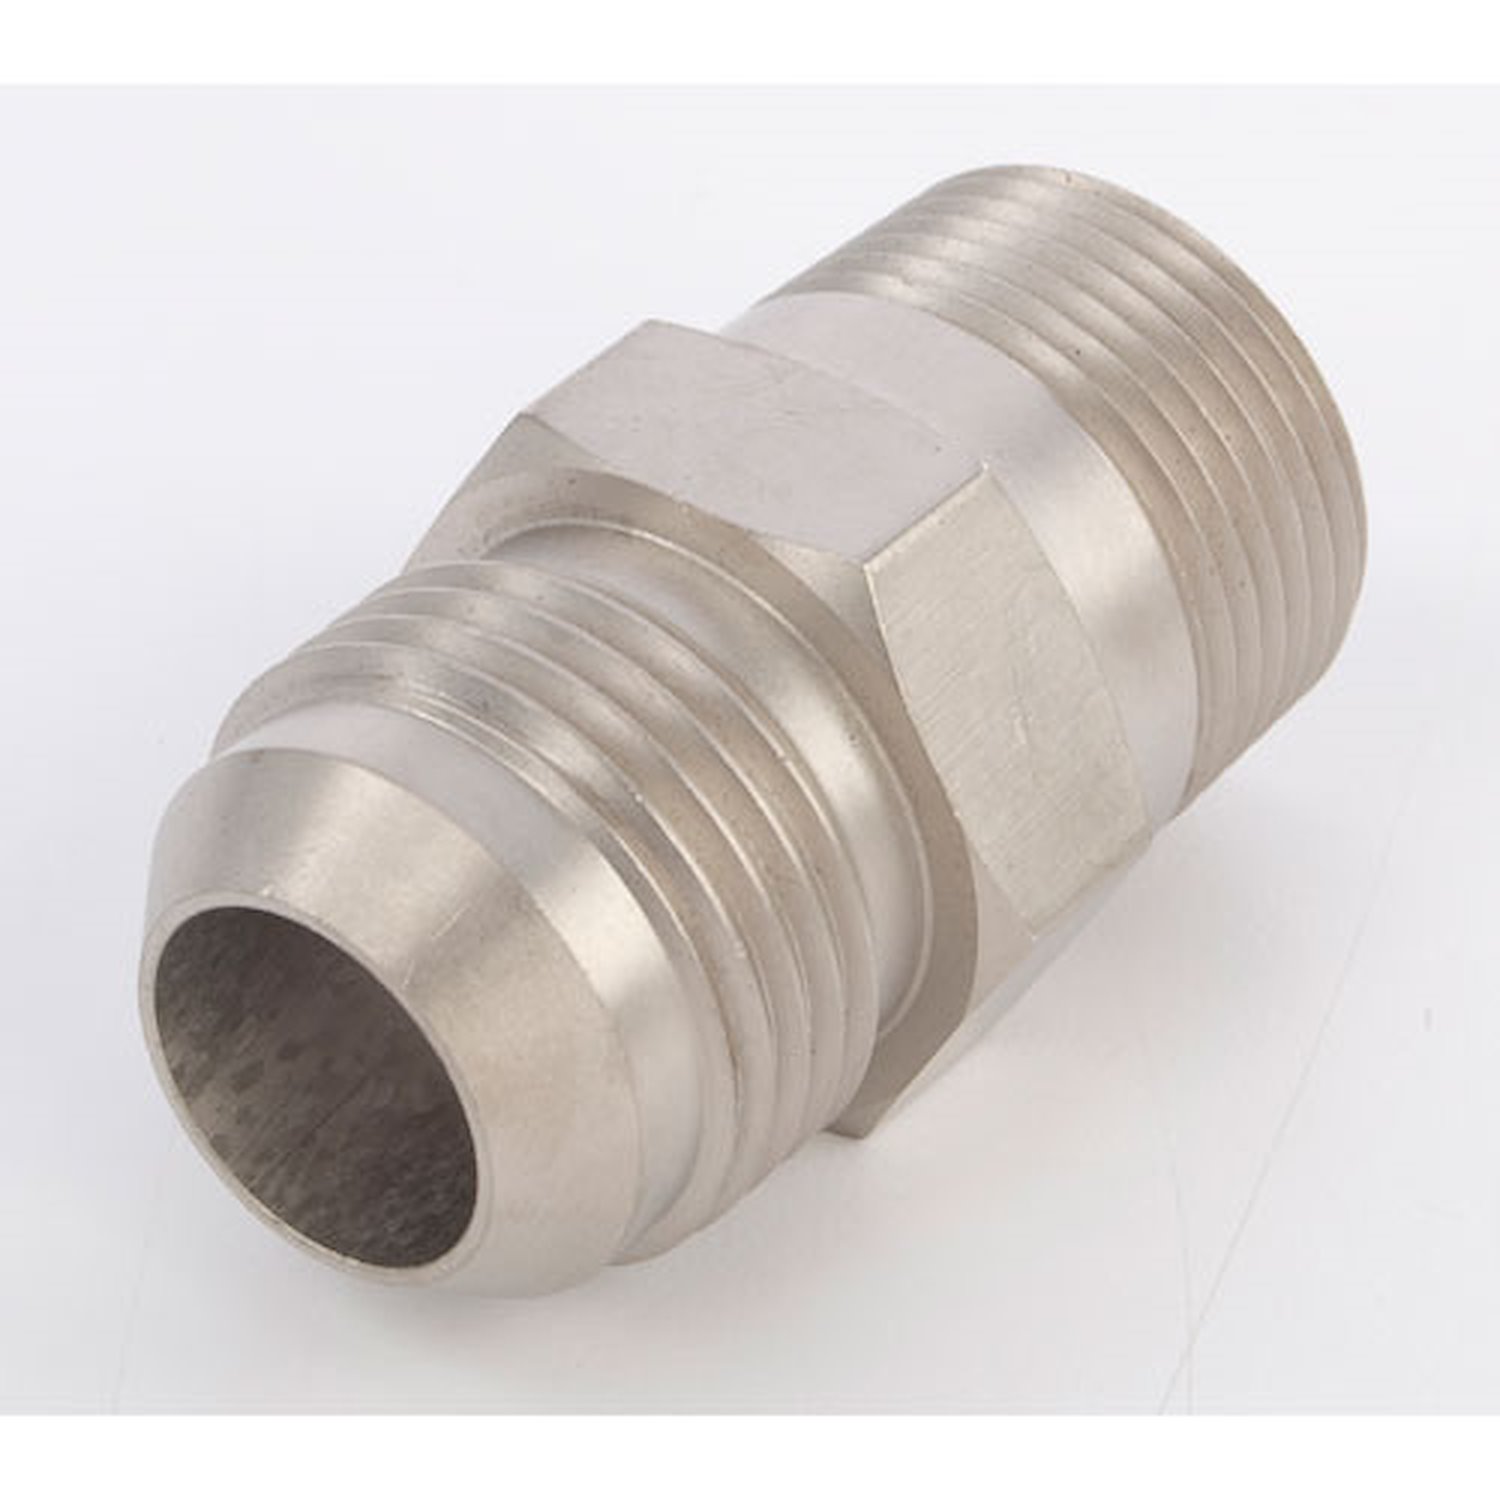 AN to NPT Straight Adapter Fitting [-12 AN Male to 3/4 in. NPT Male, Nickel]